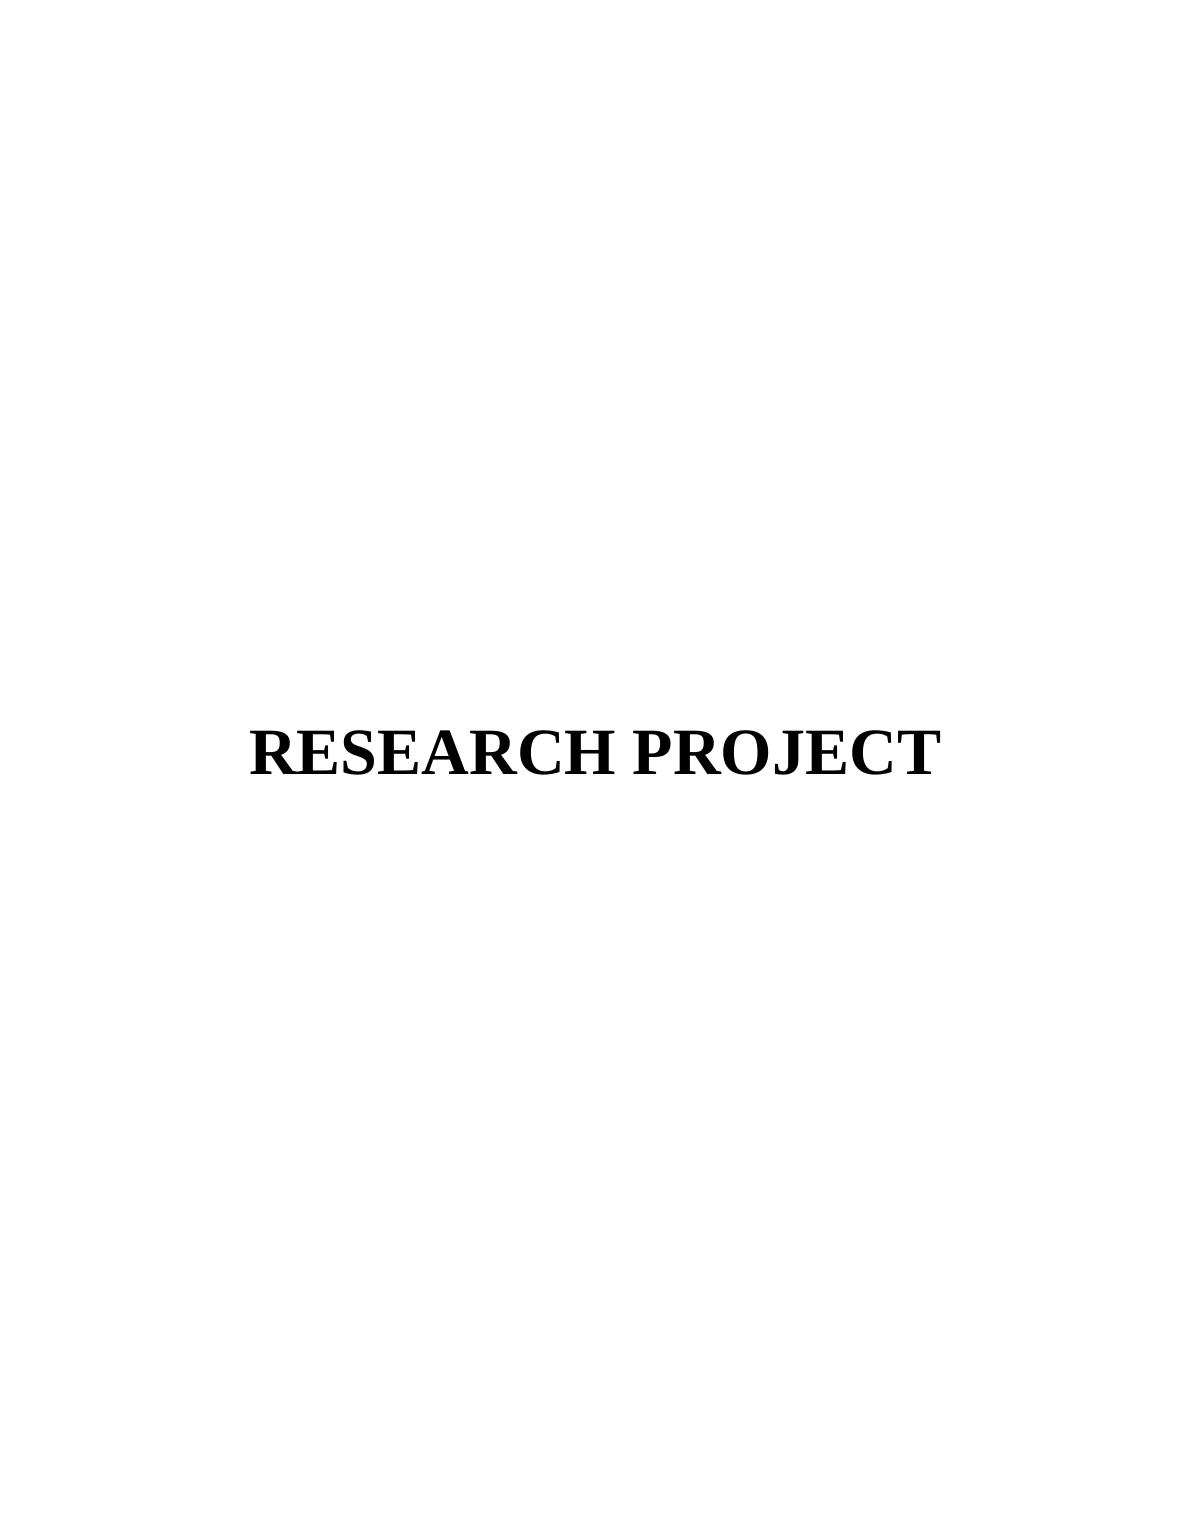 Primary and Secondary Research Projects_1